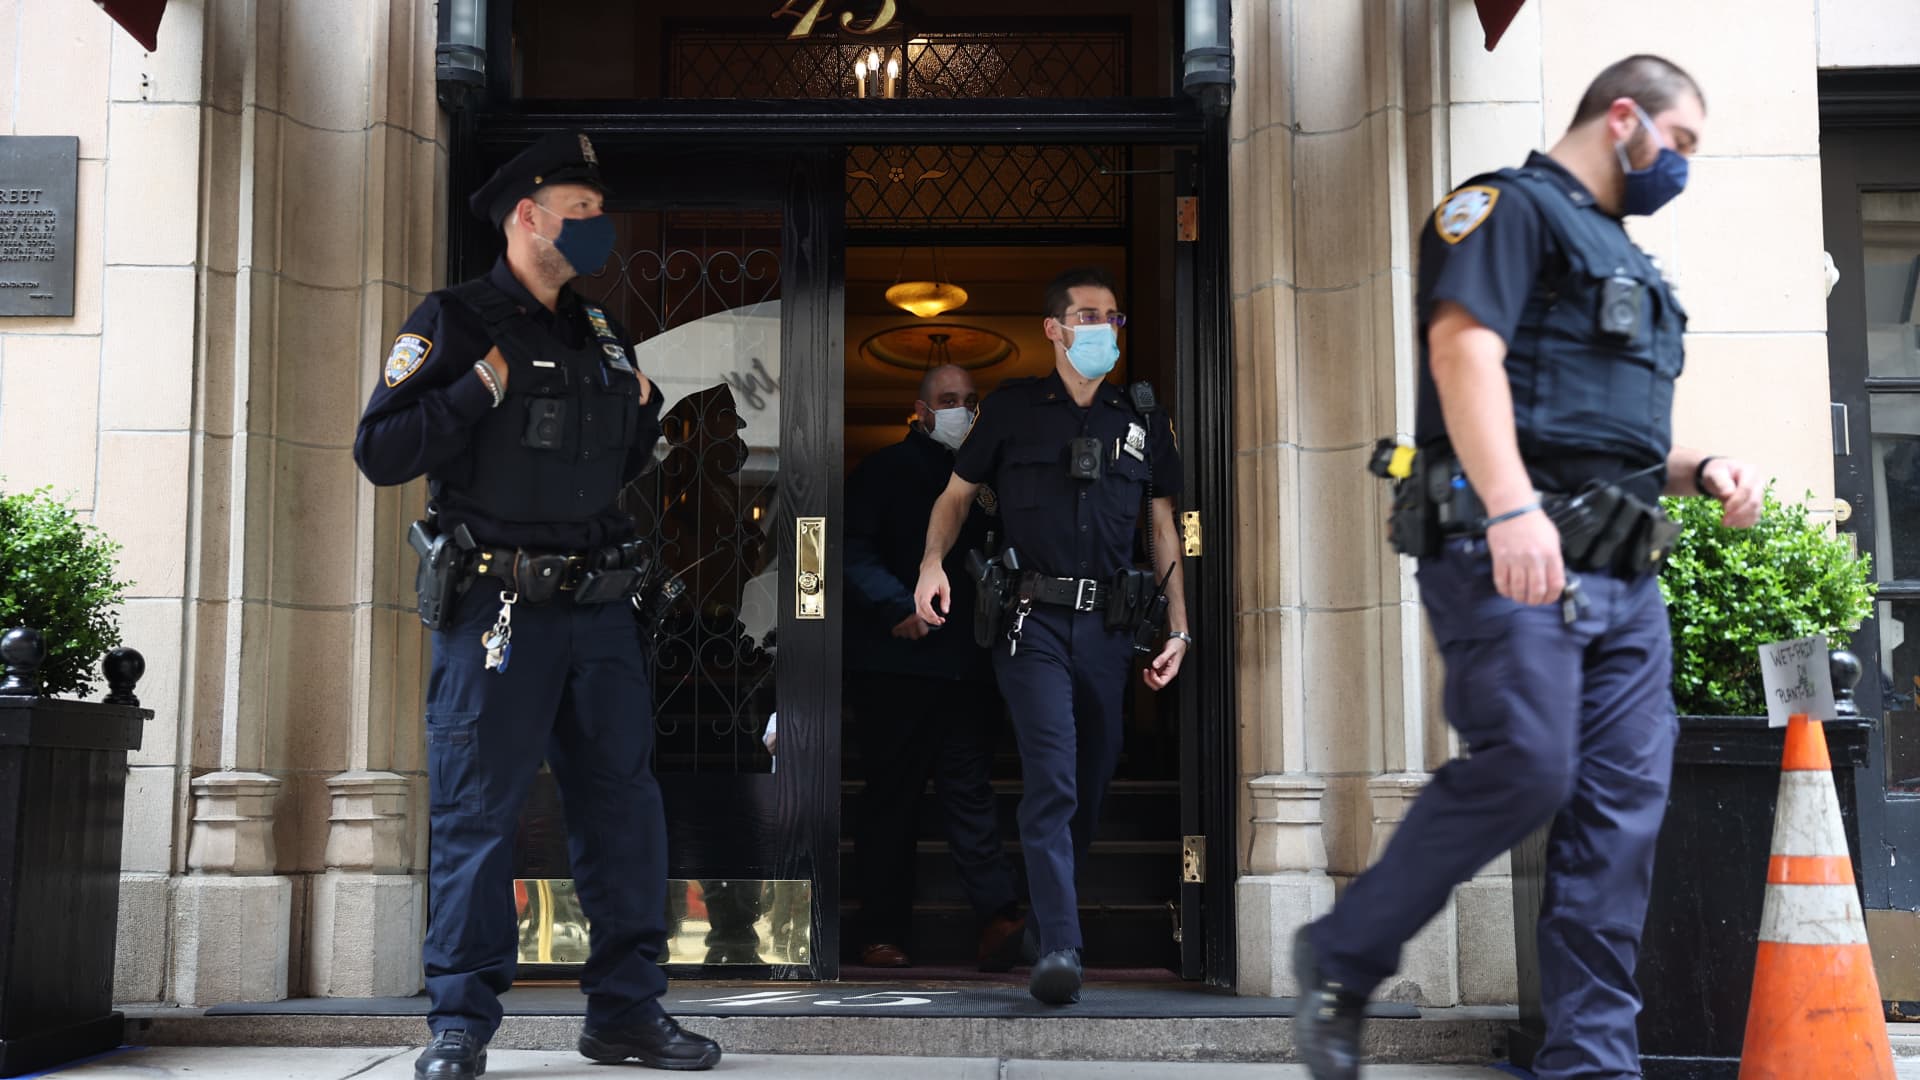 New York City Police officers investigate at the building where home of former President Donald Trump's personal attorney and the former mayor of New York City Rudy Giuliani located after FBI has executed a search warrant at Giulianiâs apartment in Manhattan of New York City, United States on April 28, 2021.